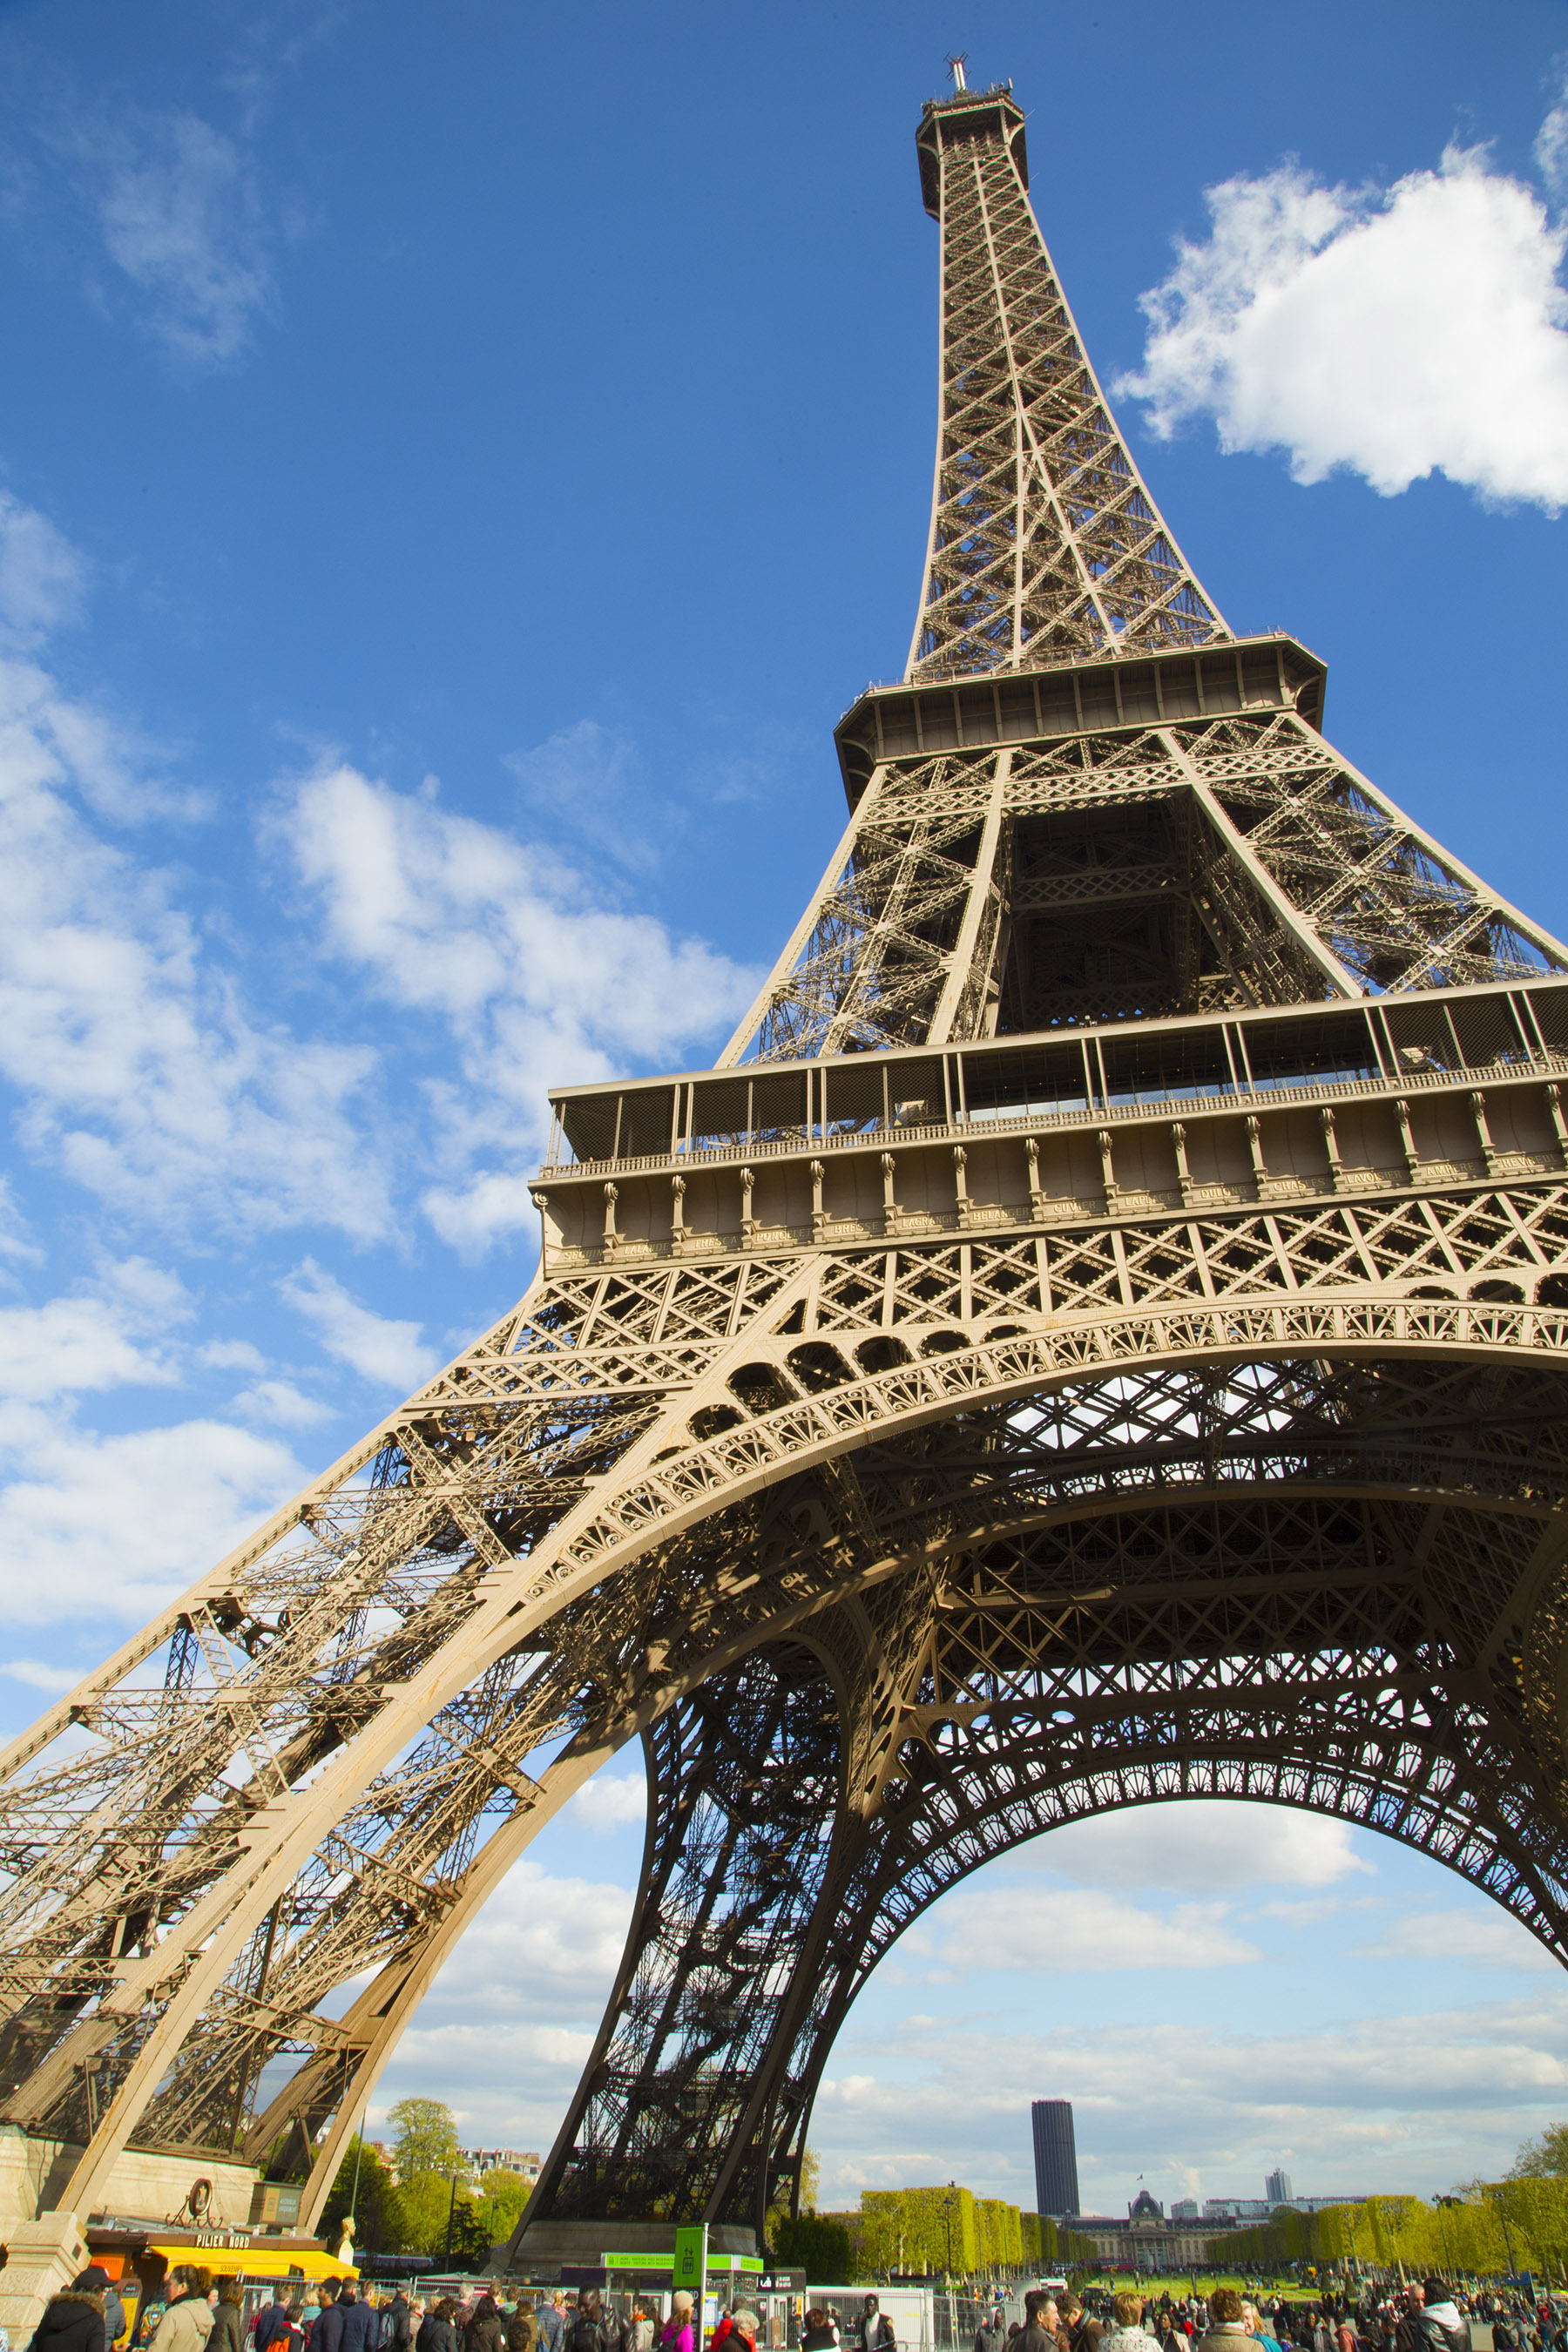 HomeAway® gives travelers a chance to sleep in the Eiffel Tower for the